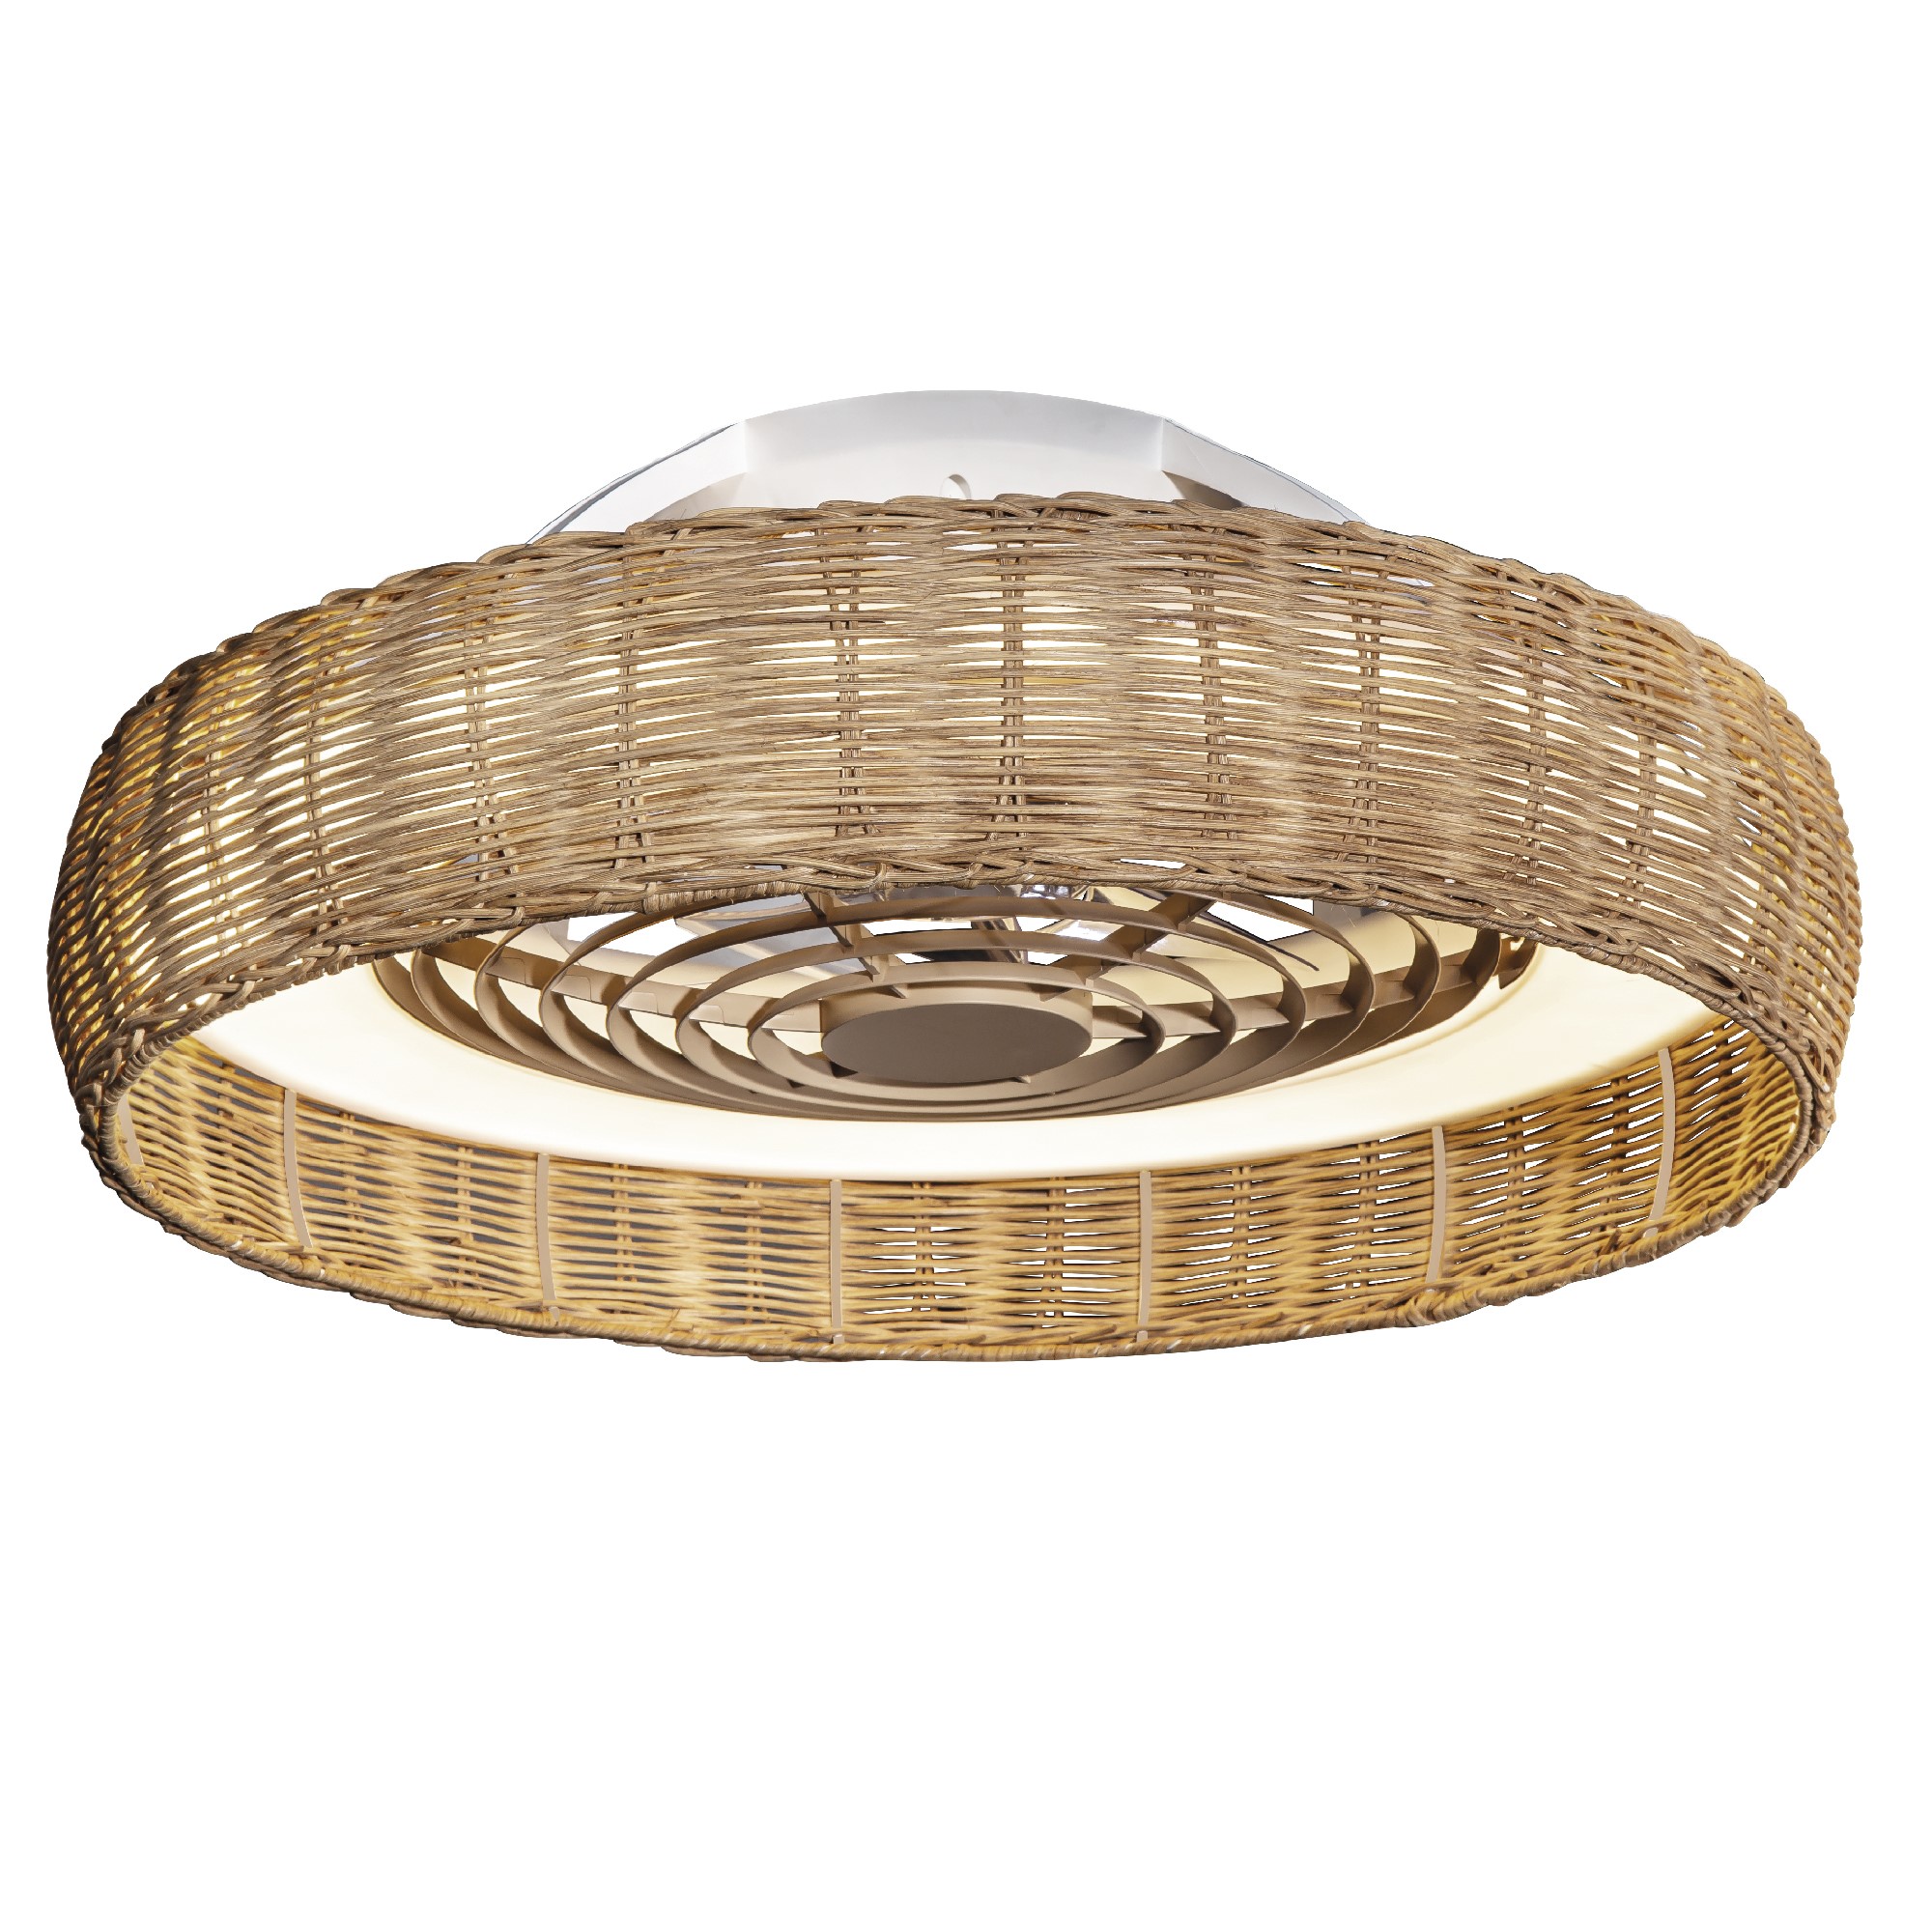 M7811  Kilimanjaro 70W LED Dimmable Ceiling Light & Fan, Remote Controlled Beige Rattan